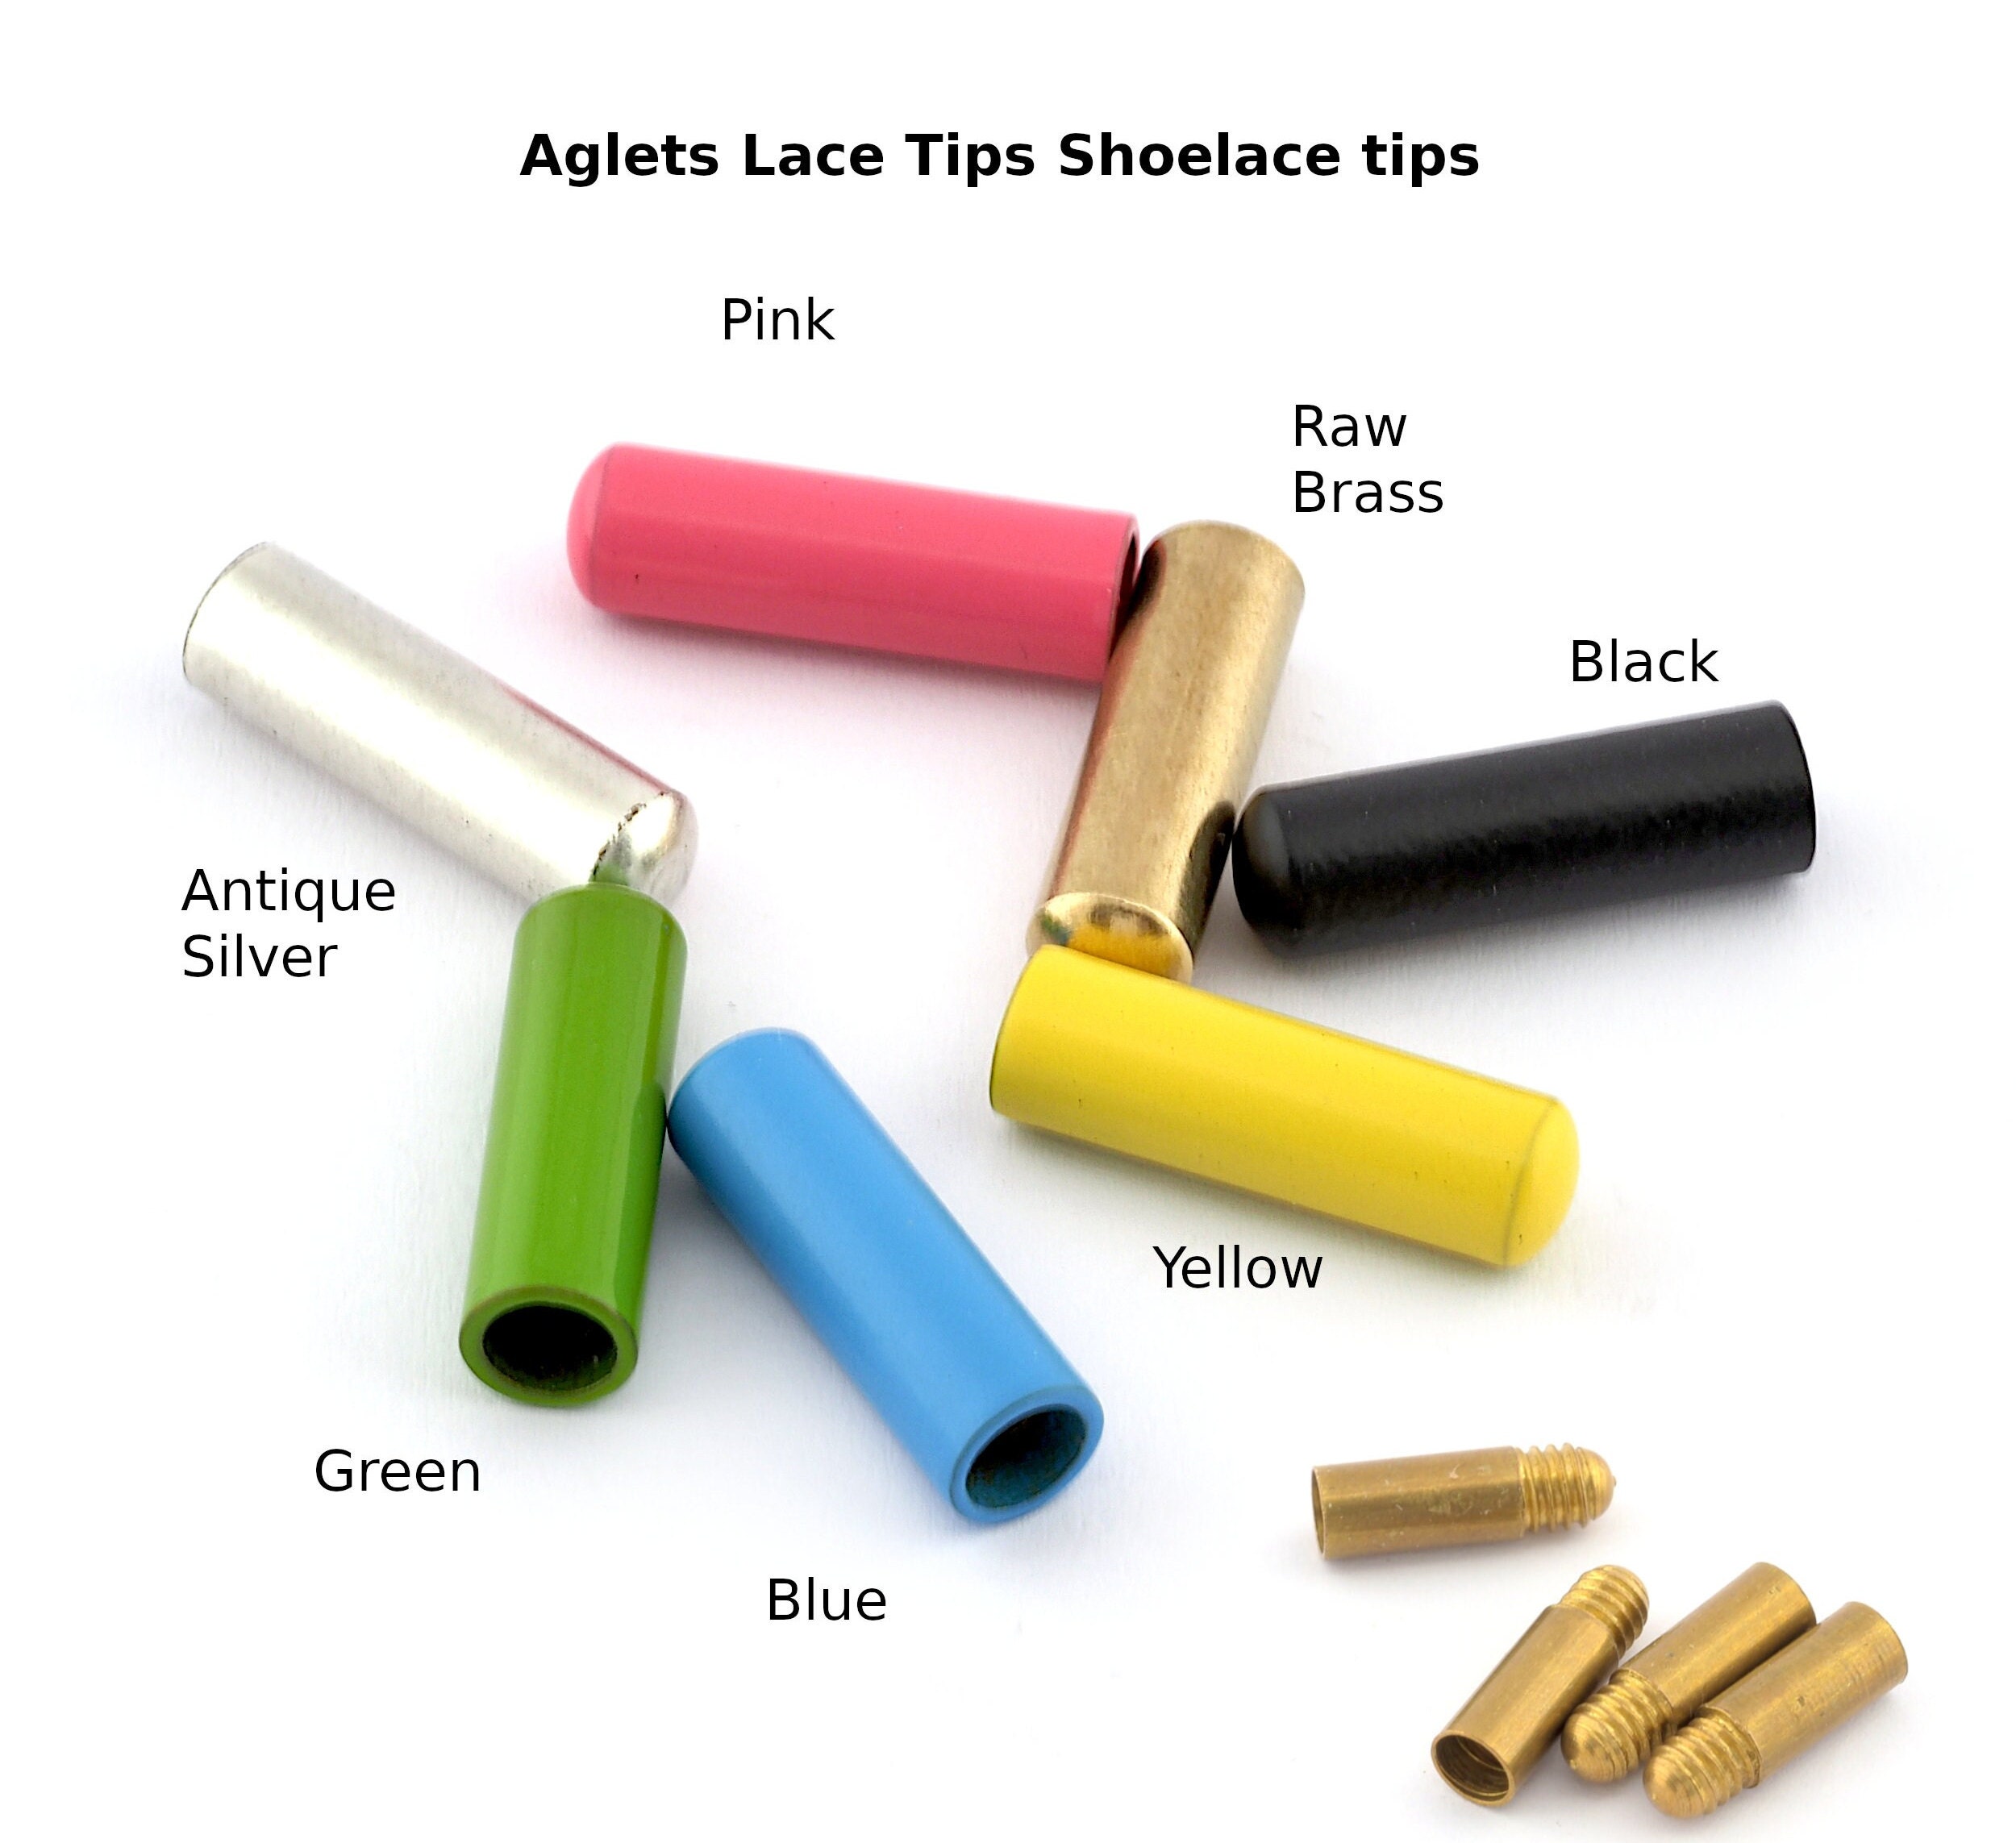 The History of Aglets